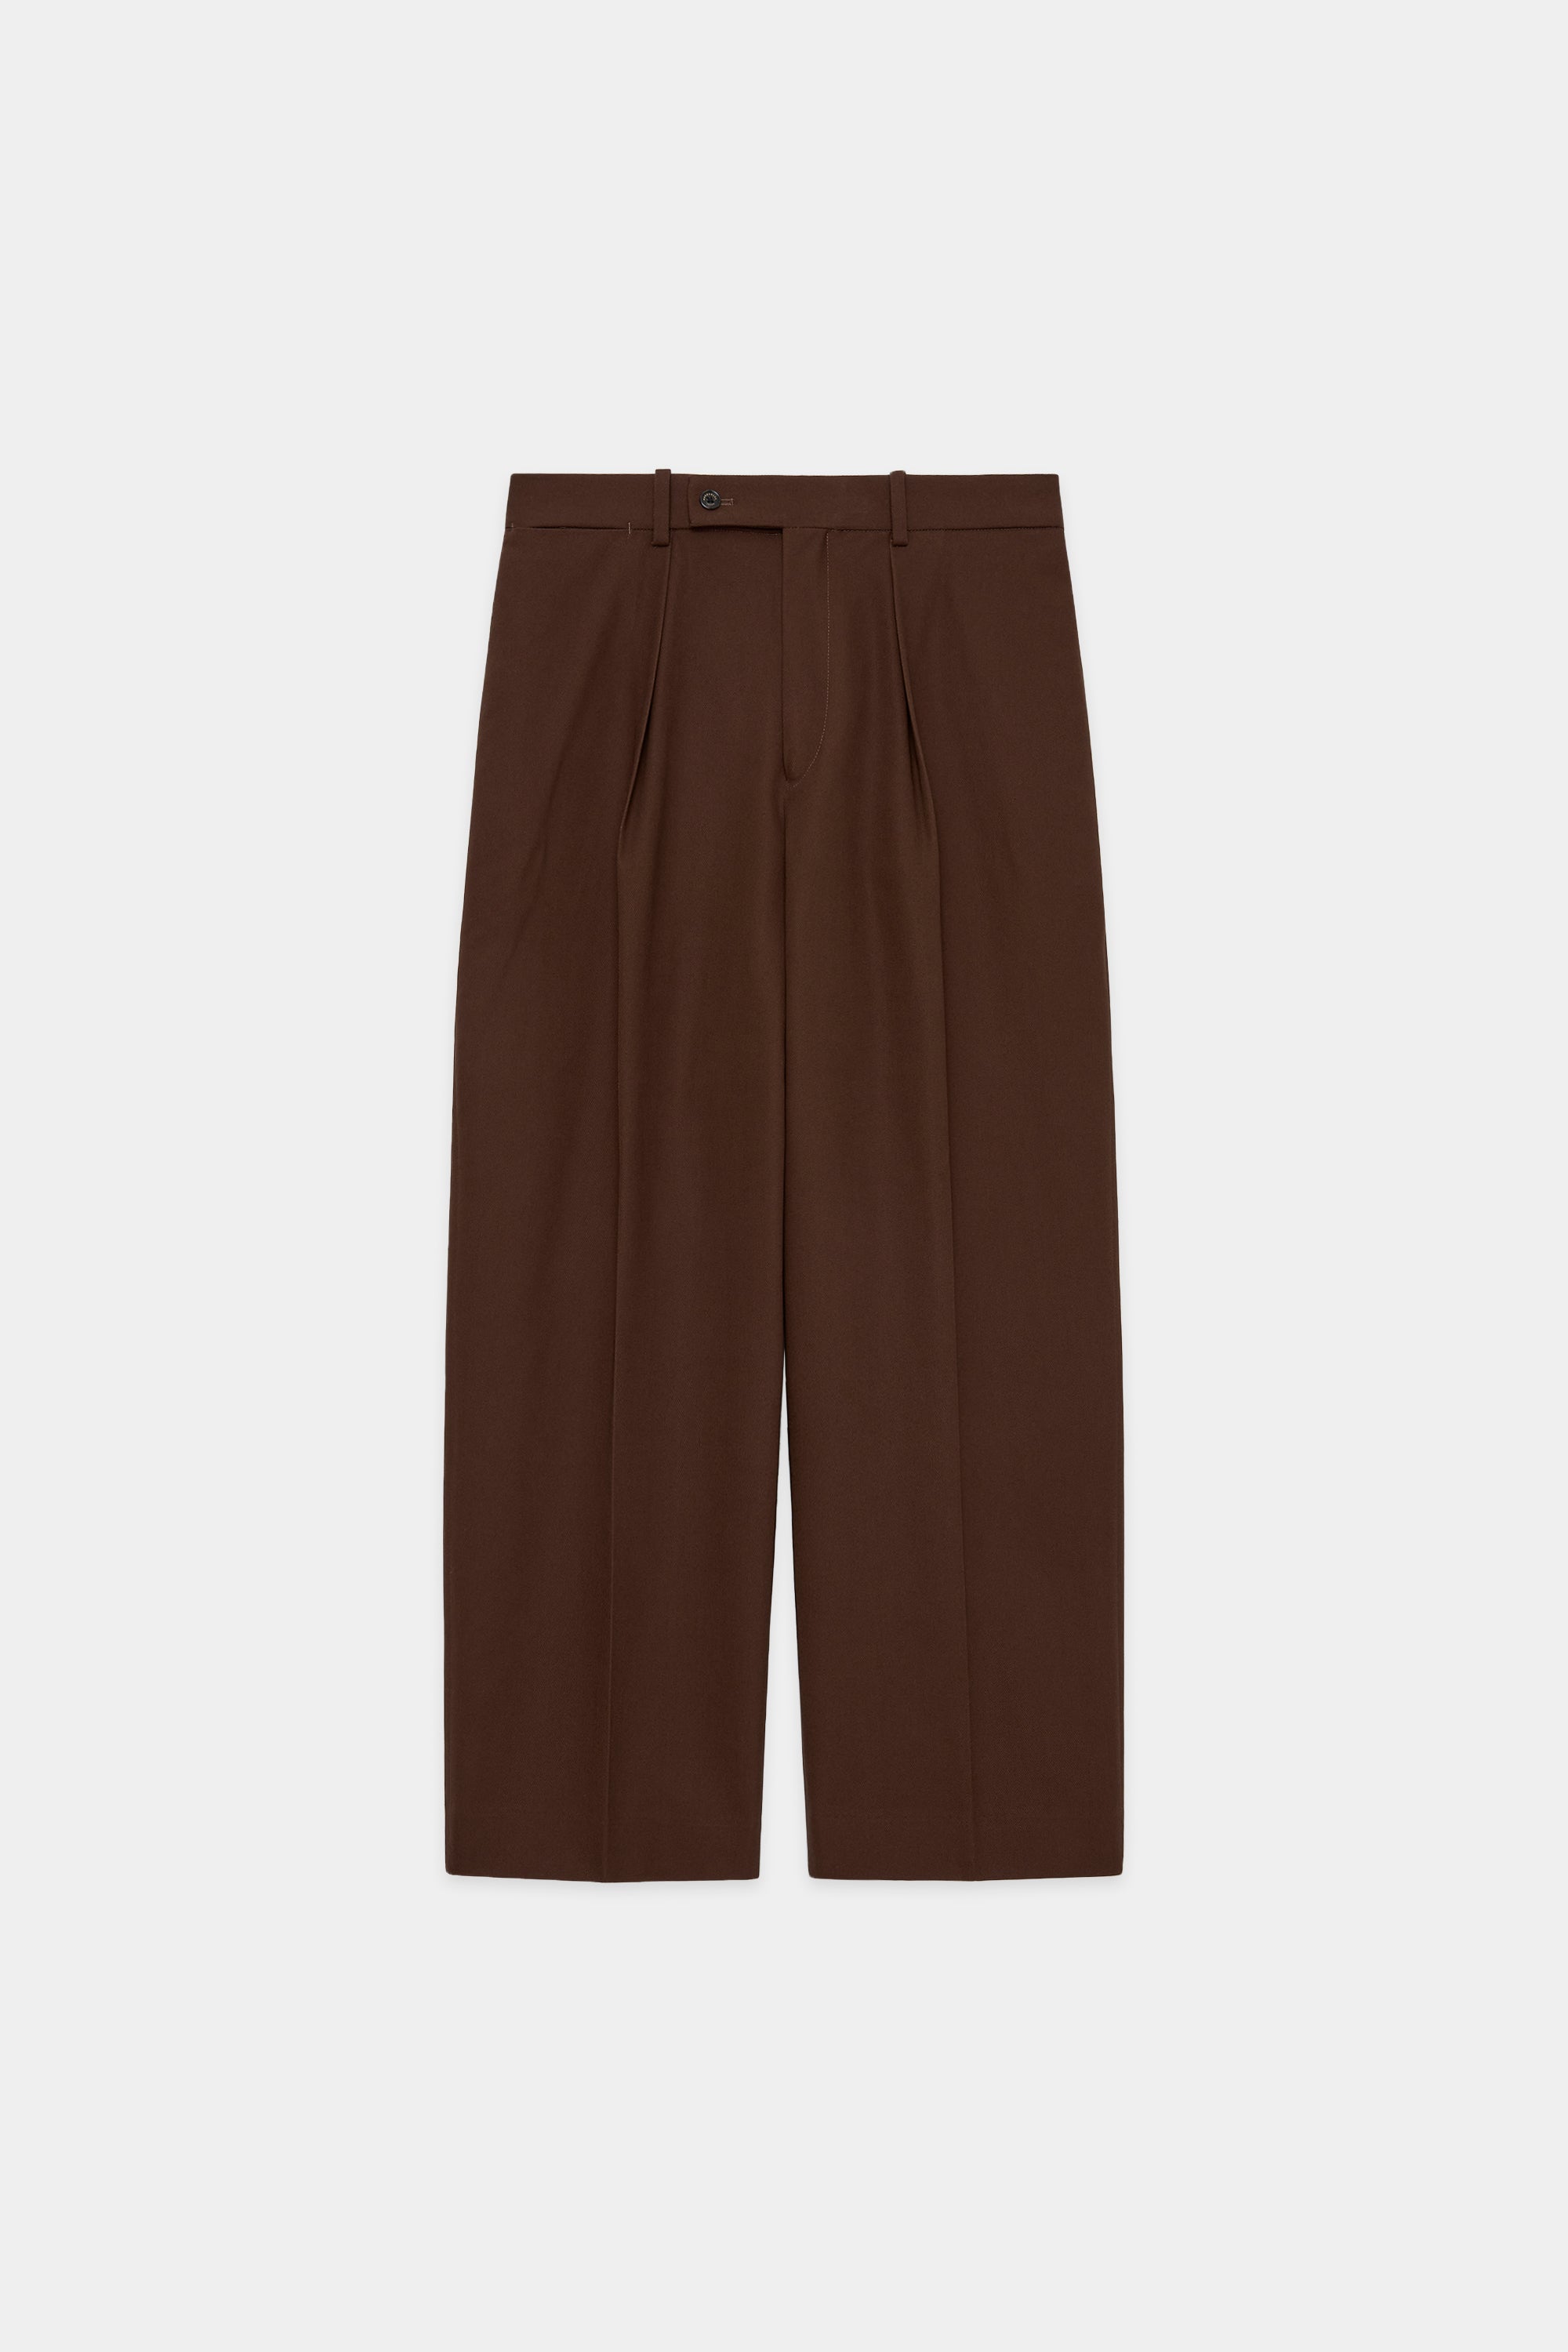 ORGANIC COTTON SURVIVAL CLOTH CLASSIC FIT TROUSERS, Brown